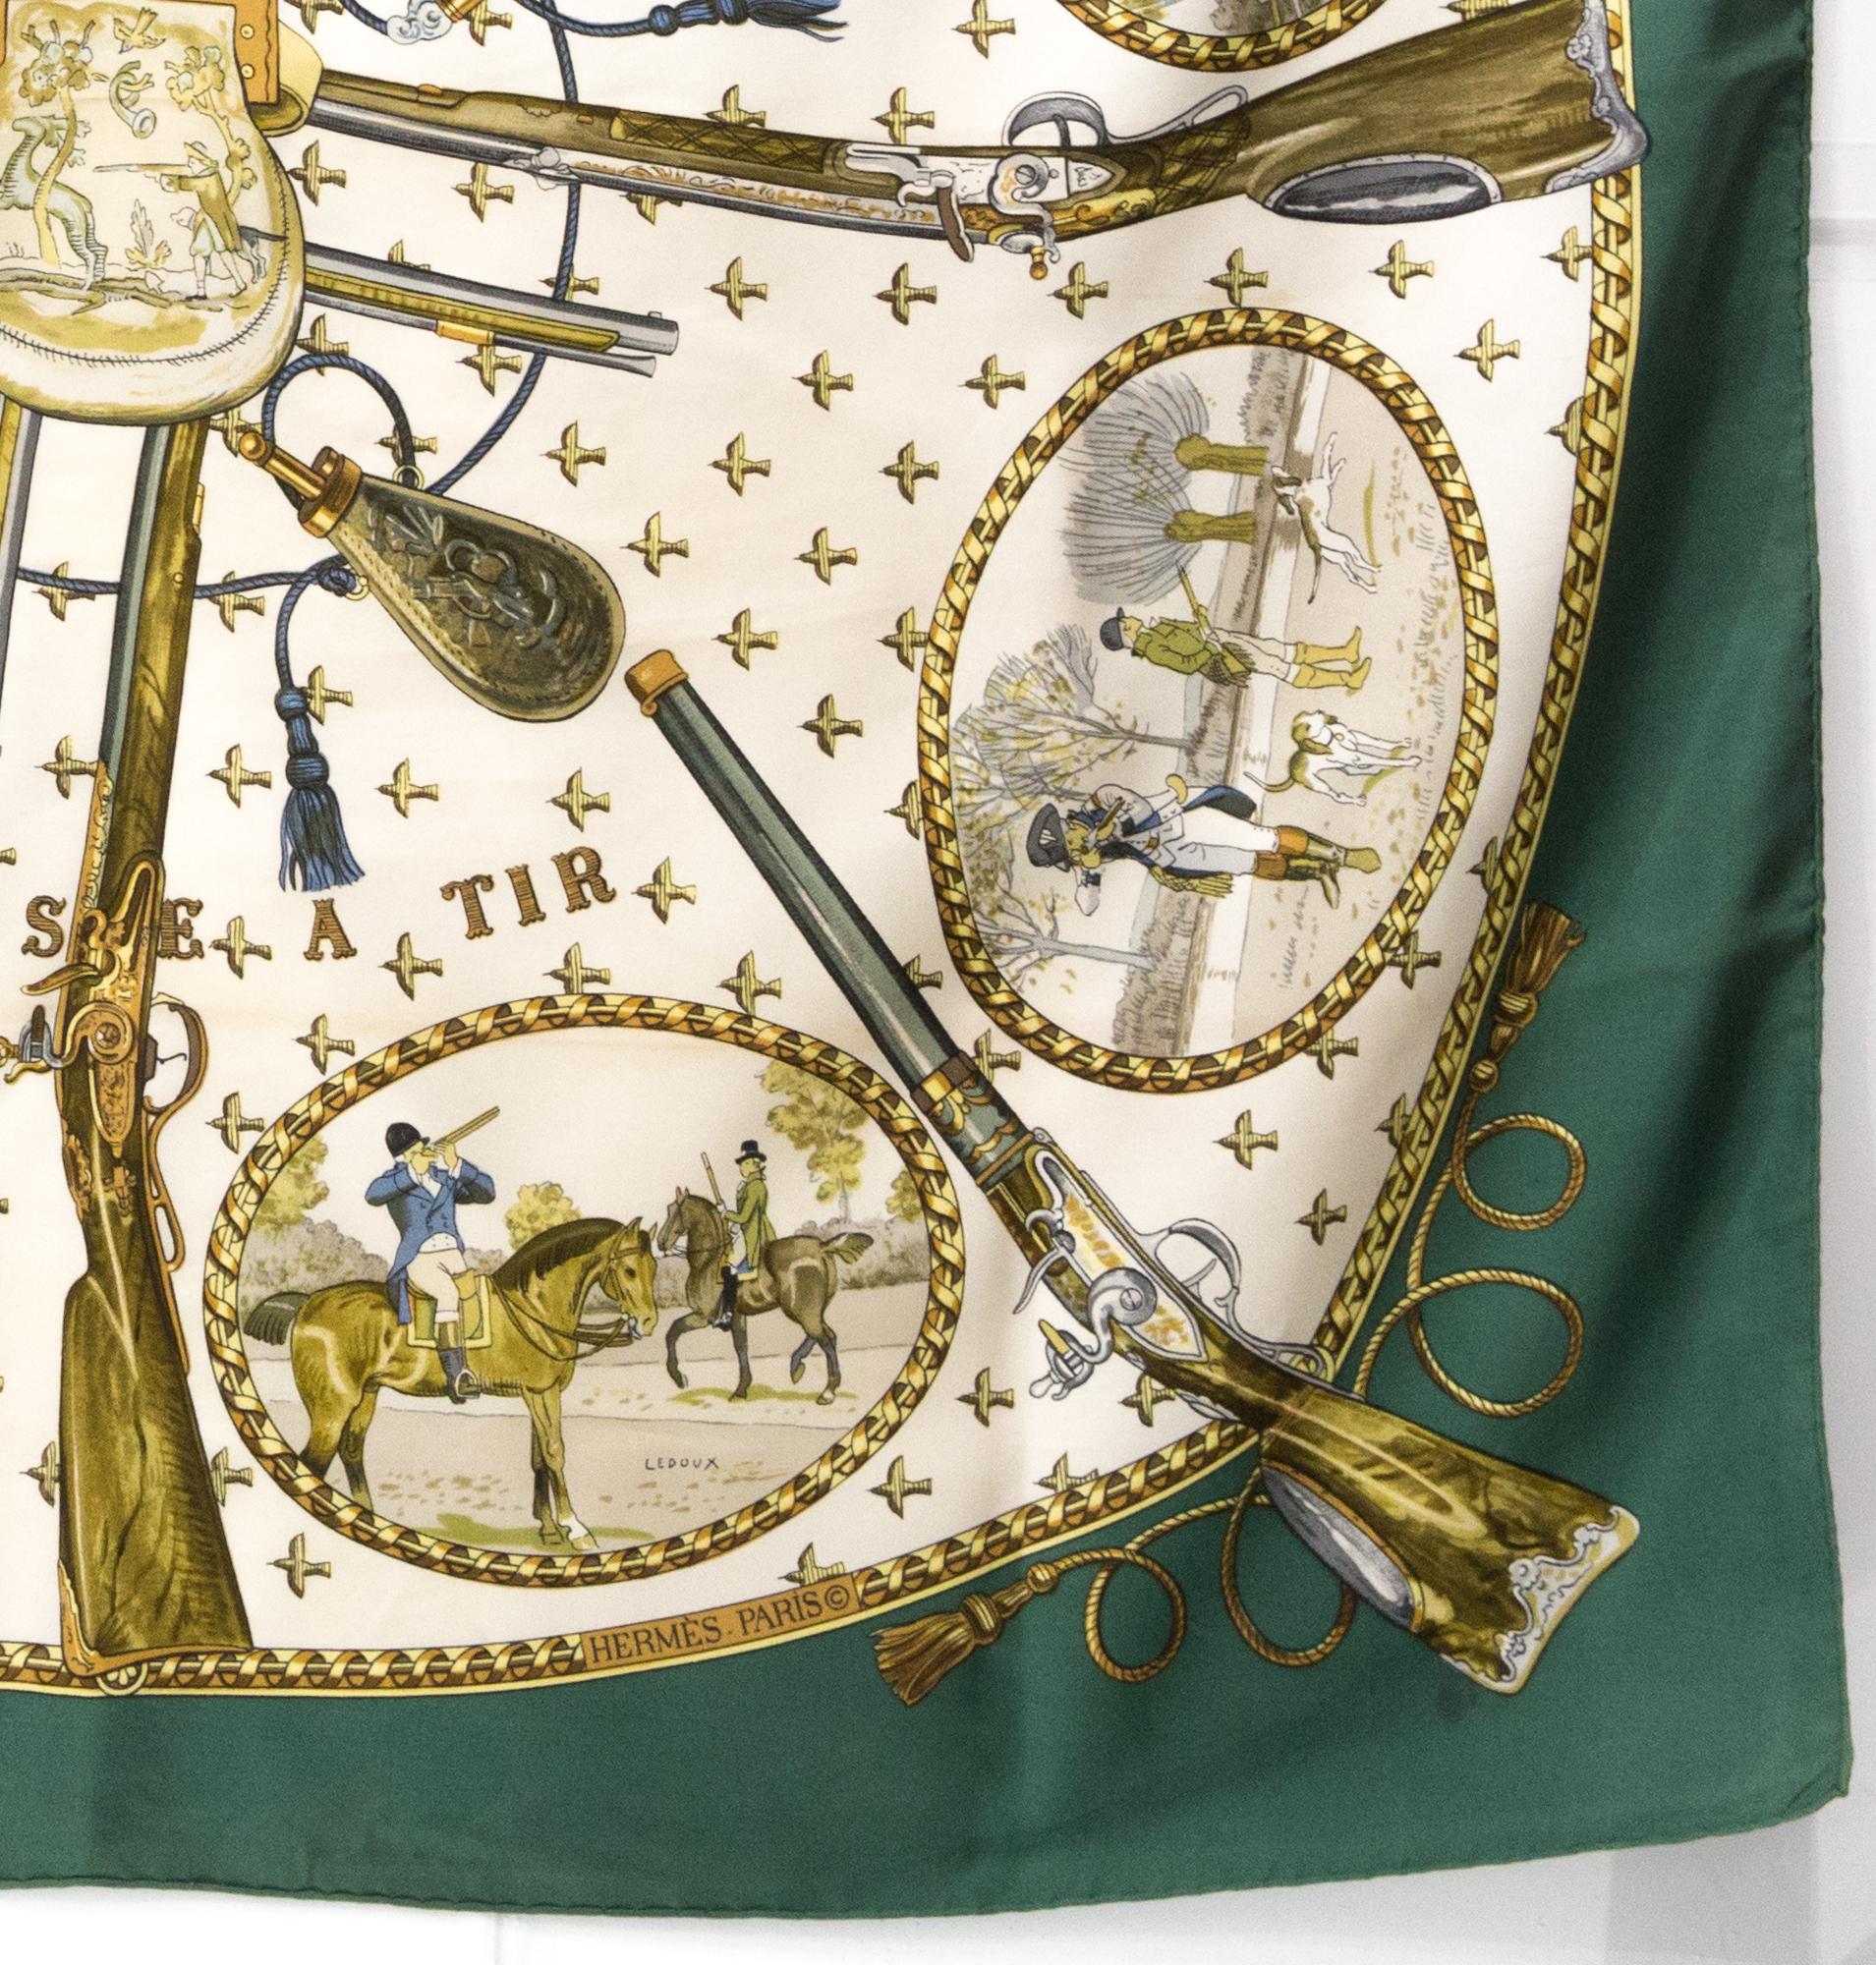 Hermes La Chasse A Tir by P Ledoux Silk Scarf For Sale 1